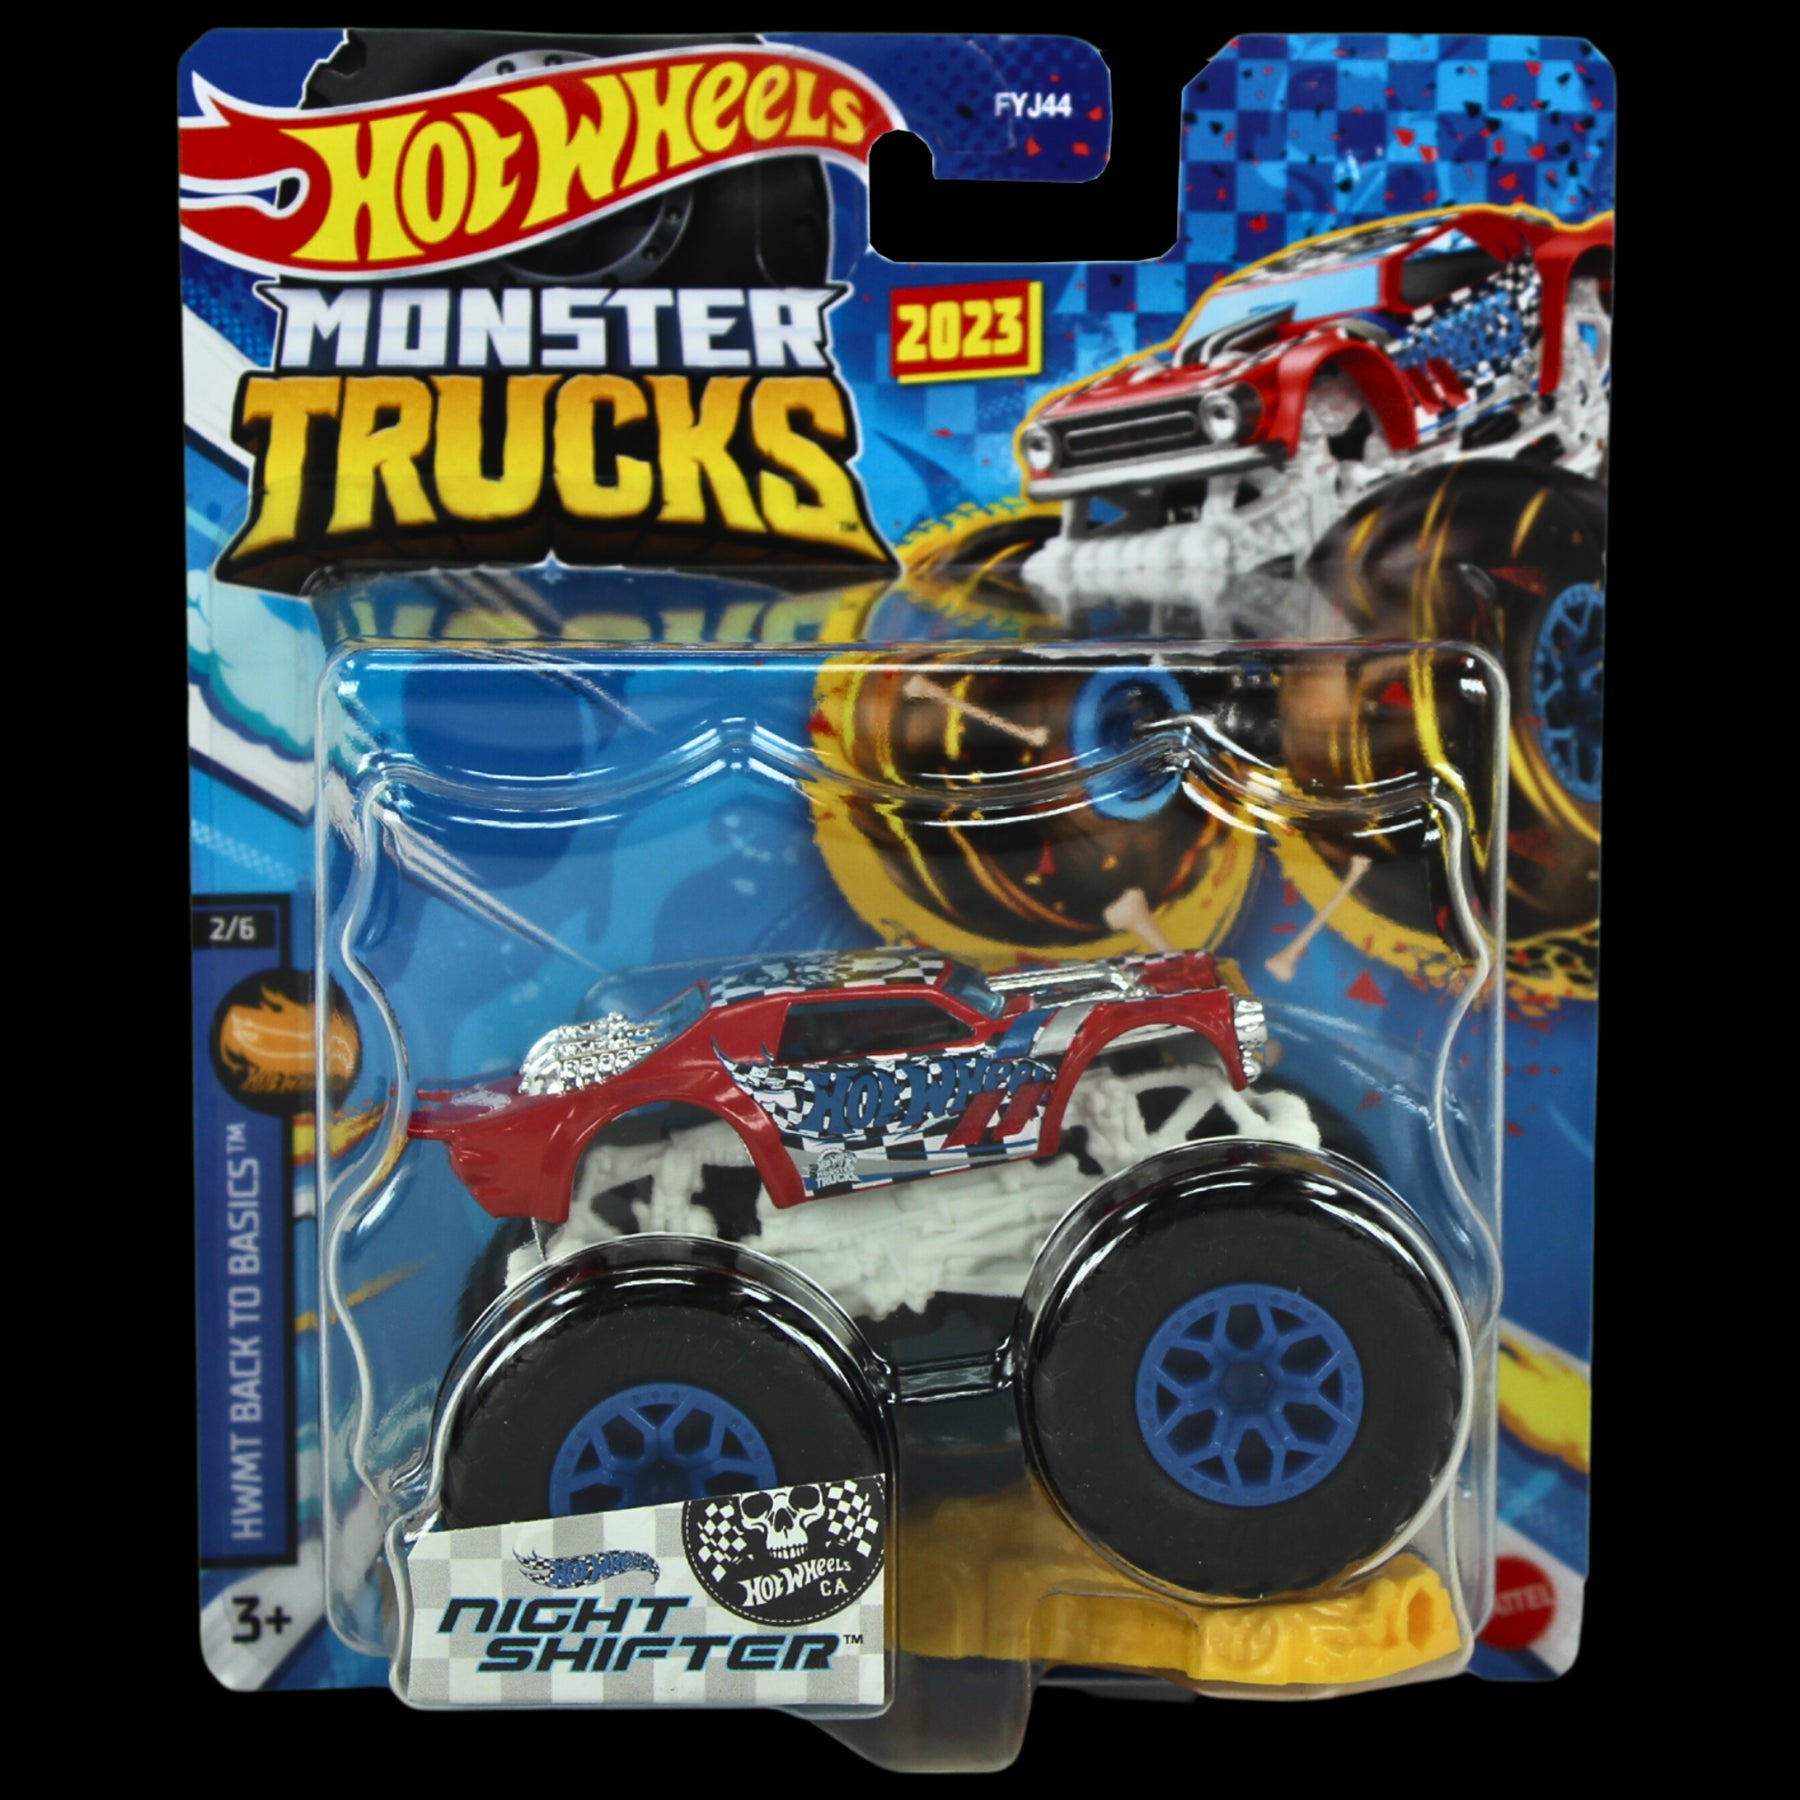 Hot Wheels Monster Trucks - 1:64 Scale Diecast - DragBus & Night Shifter - Twin Pack - Toptoys2u